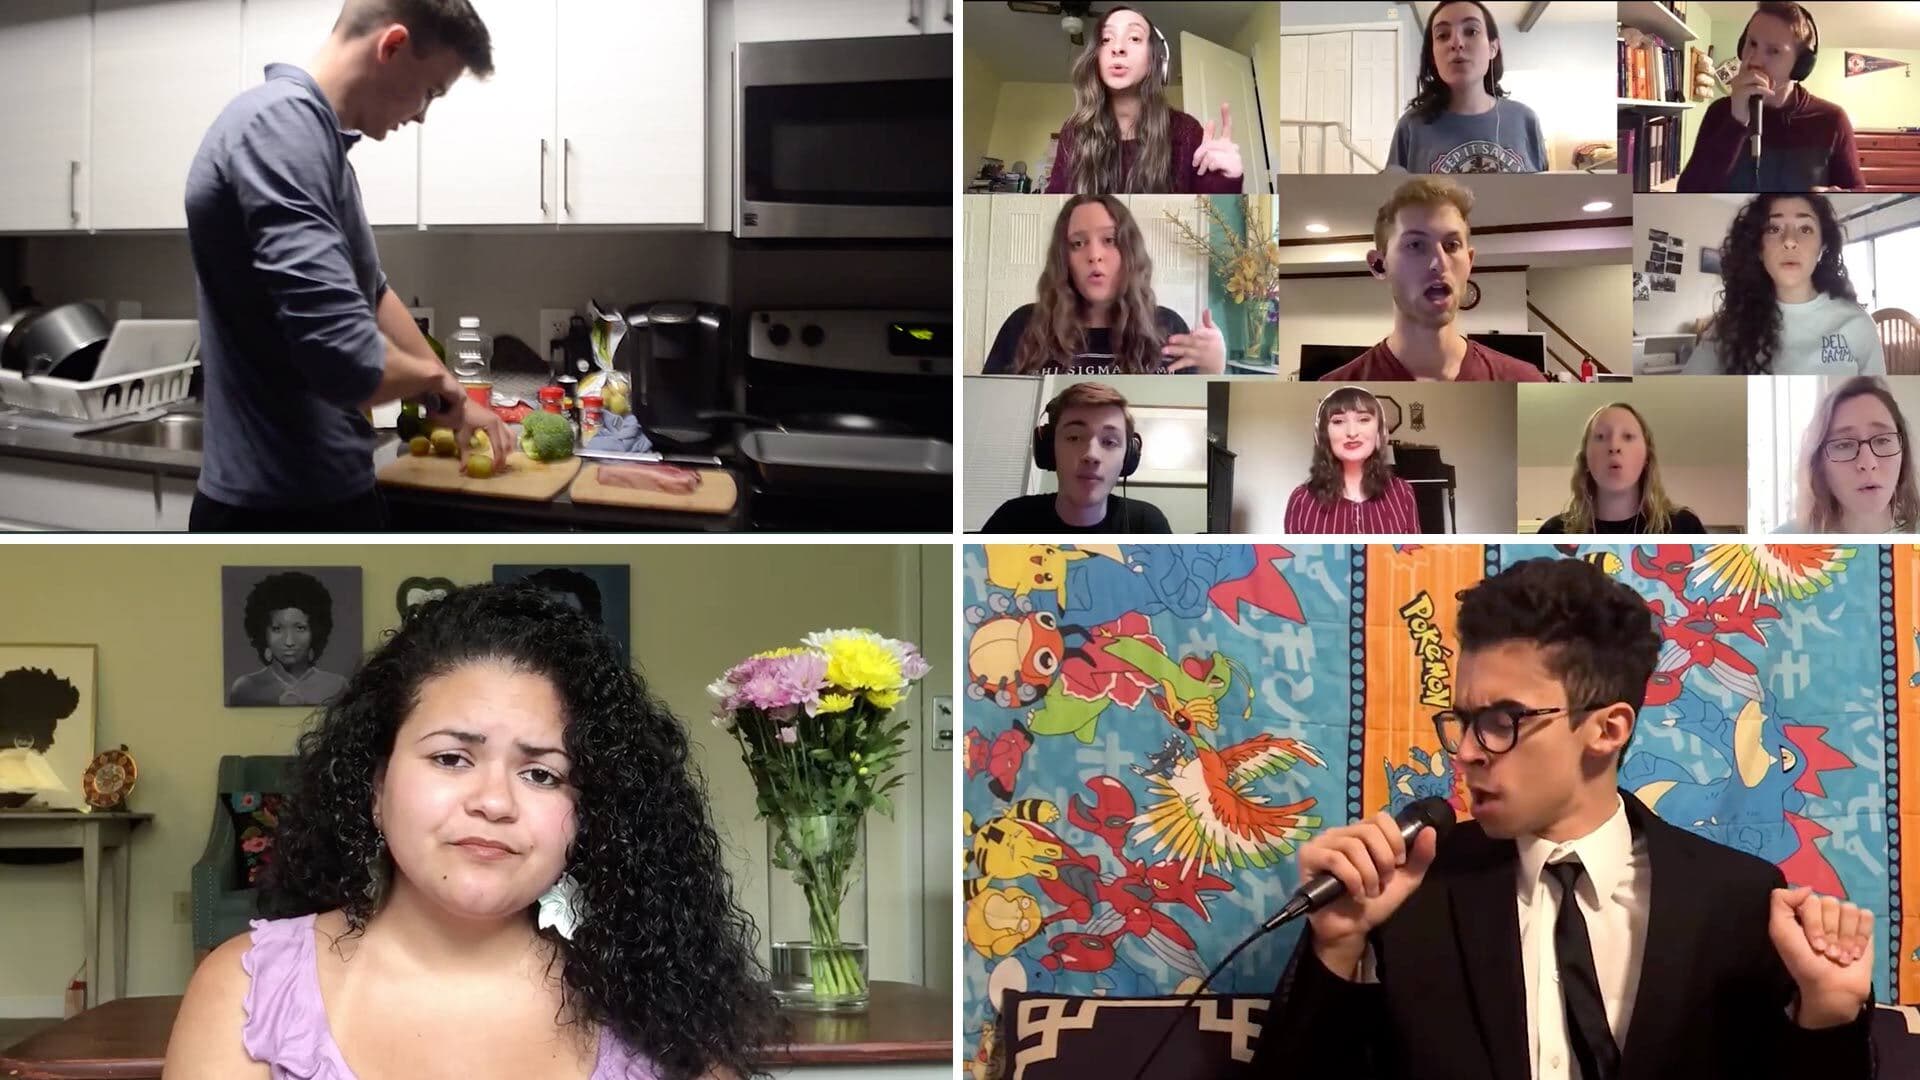 Screengrabs of students cooking, singing and reading poetry